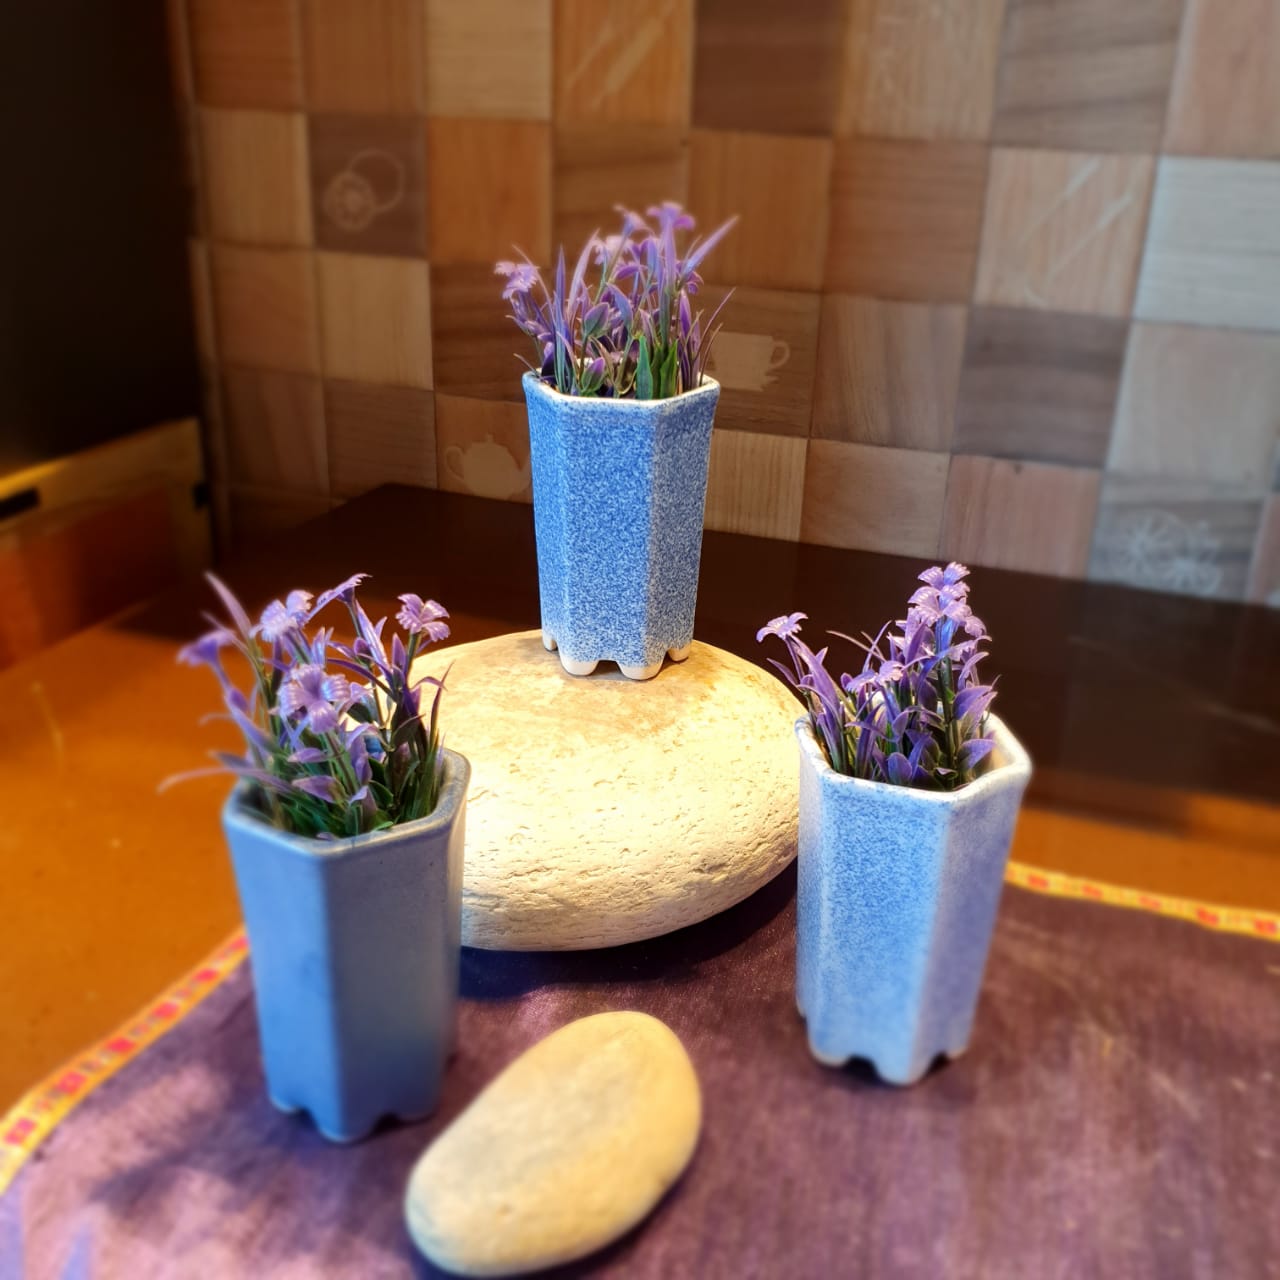 Blue Plain and Dotted Miniature Planters Set of 3 Ceramic Planter, Outdoor and Indoor Planter, Ceramic Planter for Real Plants, Desk Planters, 6 x 6 x 10 cm